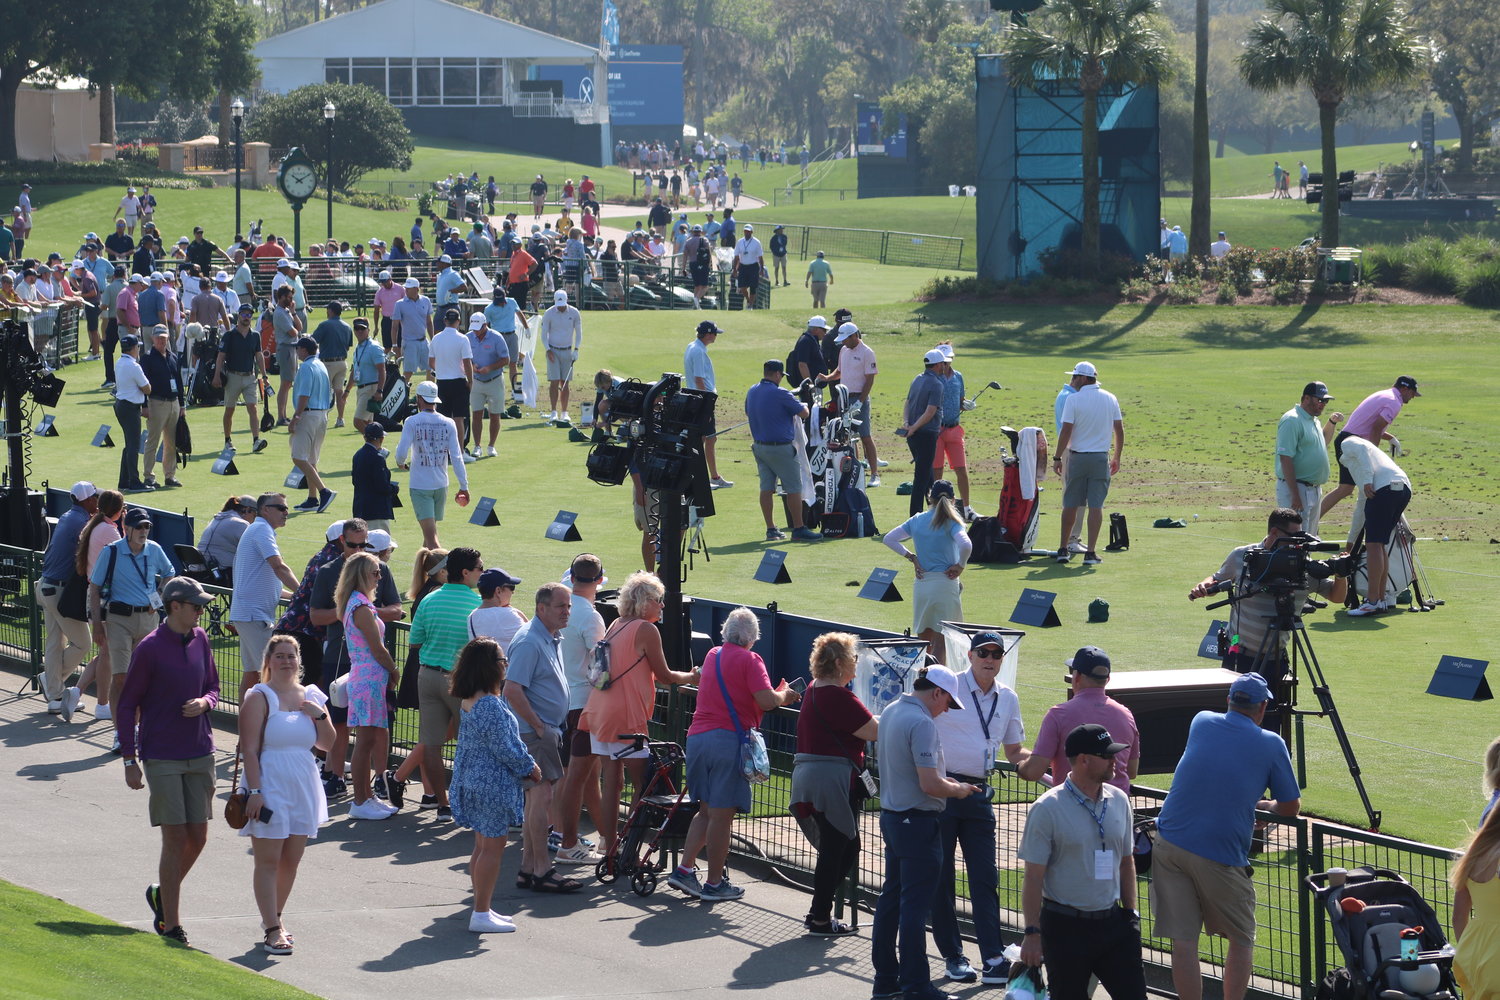 Fans gather around the driving range to get a closer look at the players.